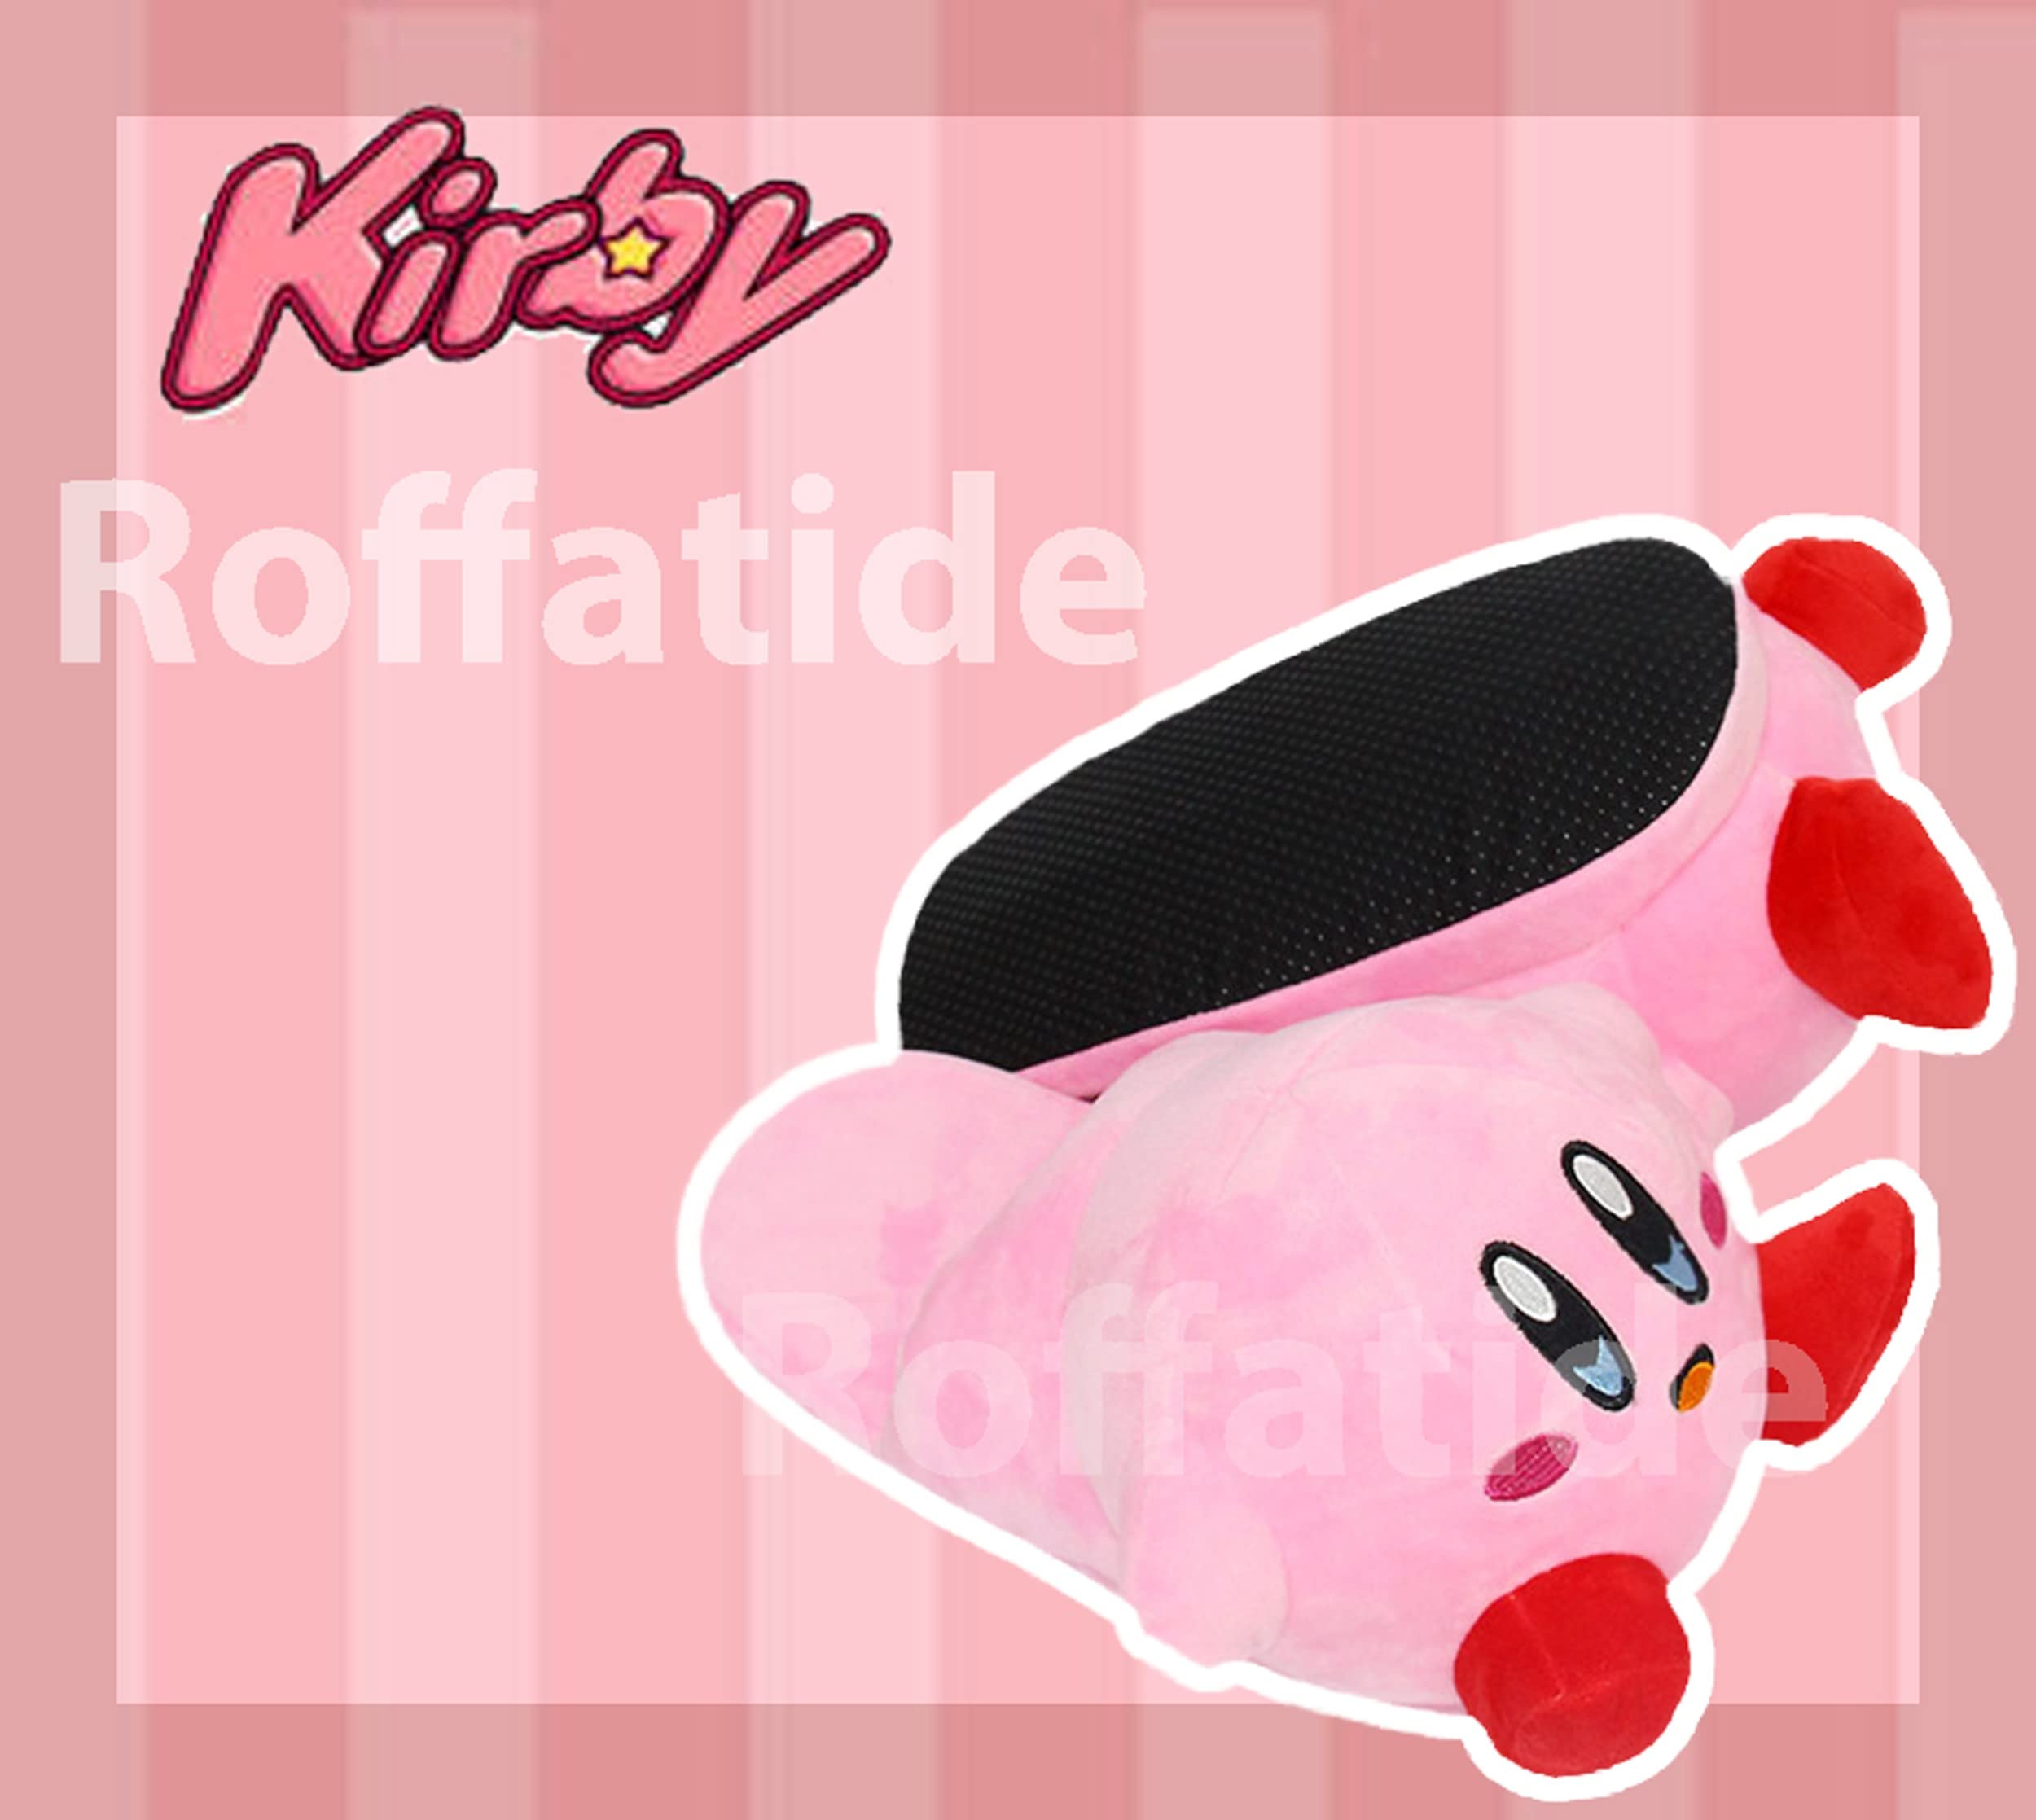 Roffatide Anime Kirby Cute Plush Open Back Floor Slippers Indoor Shoes Fuzzy Slippers with Rubber Sole for Women Pink